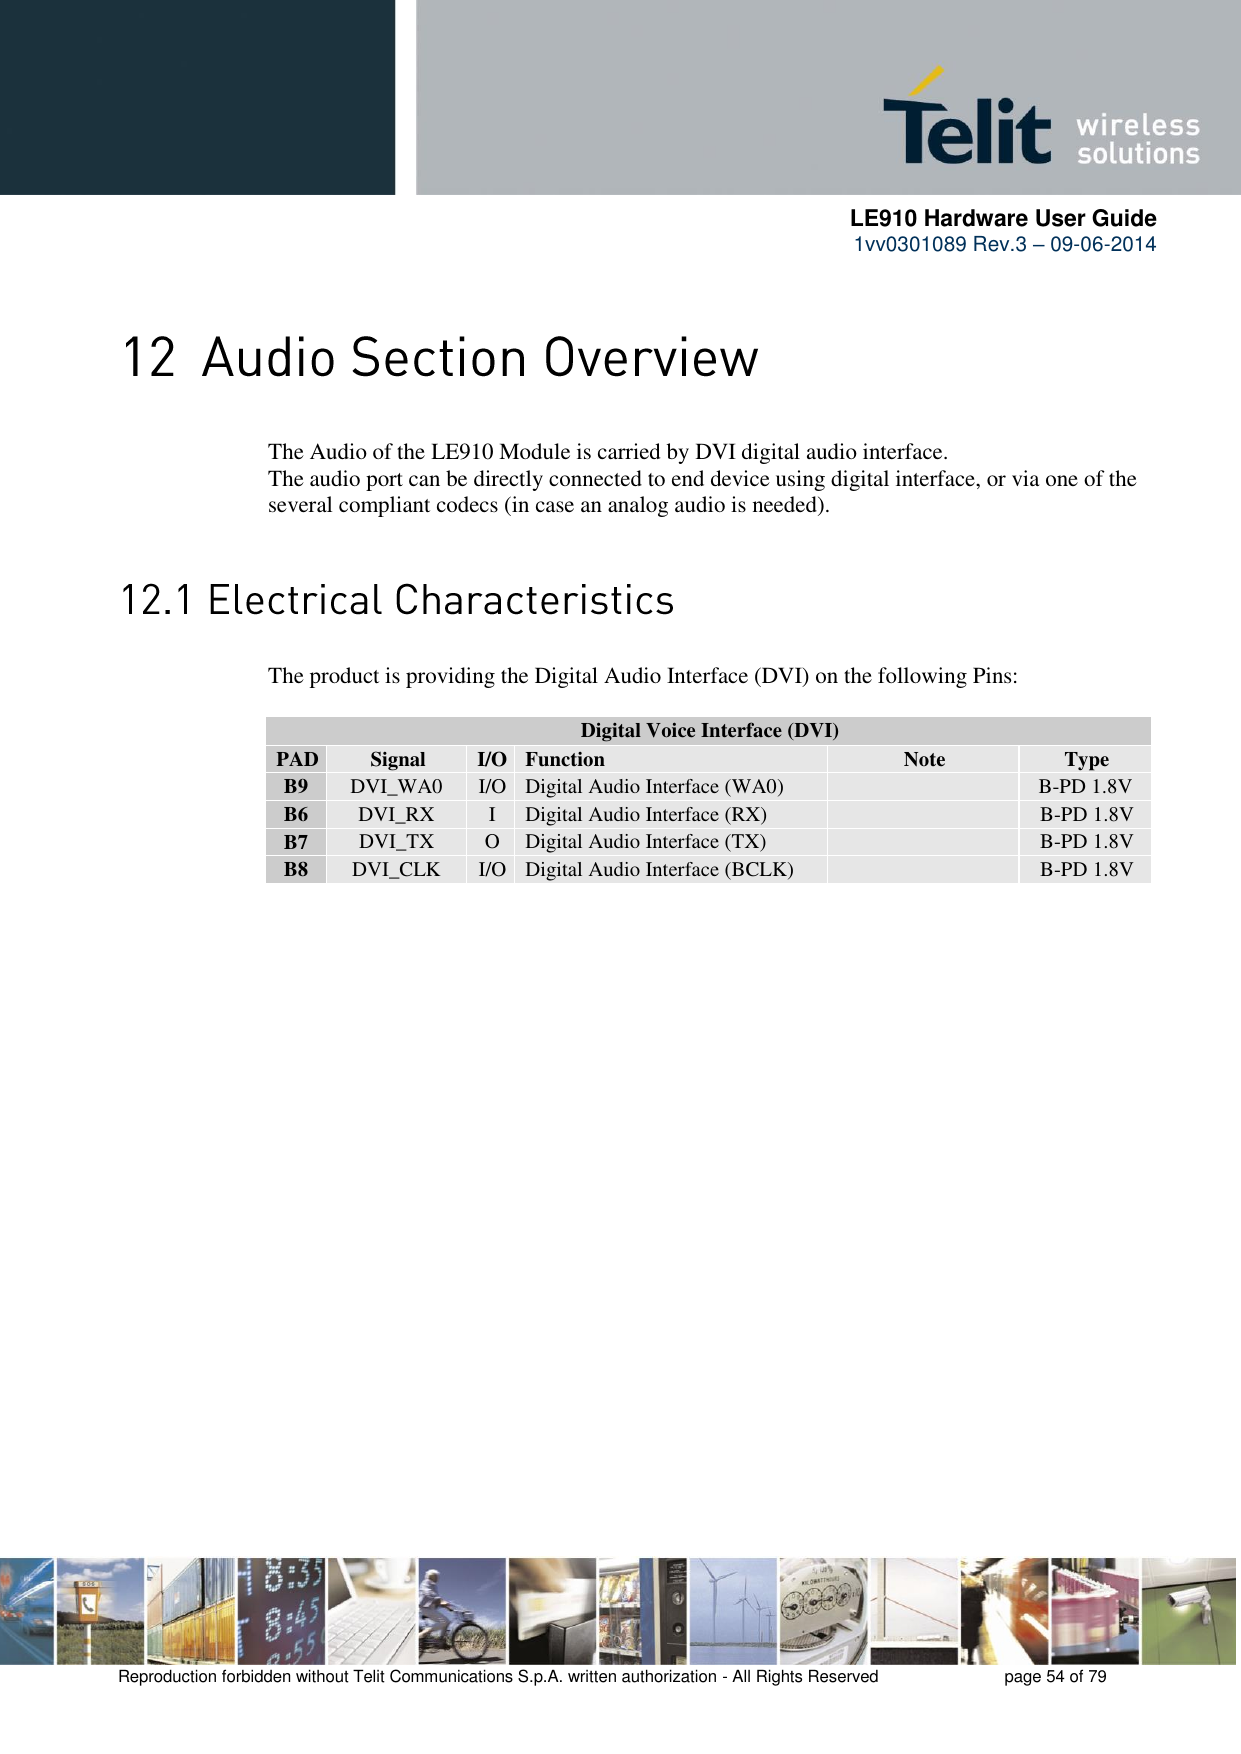      LE910 Hardware User Guide 1vv0301089 Rev.3 – 09-06-2014    Reproduction forbidden without Telit Communications S.p.A. written authorization - All Rights Reserved    page 54 of 79   The Audio of the LE910 Module is carried by DVI digital audio interface. The audio port can be directly connected to end device using digital interface, or via one of the several compliant codecs (in case an analog audio is needed).  The product is providing the Digital Audio Interface (DVI) on the following Pins:  Digital Voice Interface (DVI) PAD Signal I/O Function Note Type B9 DVI_WA0 I/O Digital Audio Interface (WA0)   B-PD 1.8V B6 DVI_RX I Digital Audio Interface (RX)  B-PD 1.8V B7 DVI_TX O Digital Audio Interface (TX)  B-PD 1.8V B8 DVI_CLK I/O Digital Audio Interface (BCLK)  B-PD 1.8V  